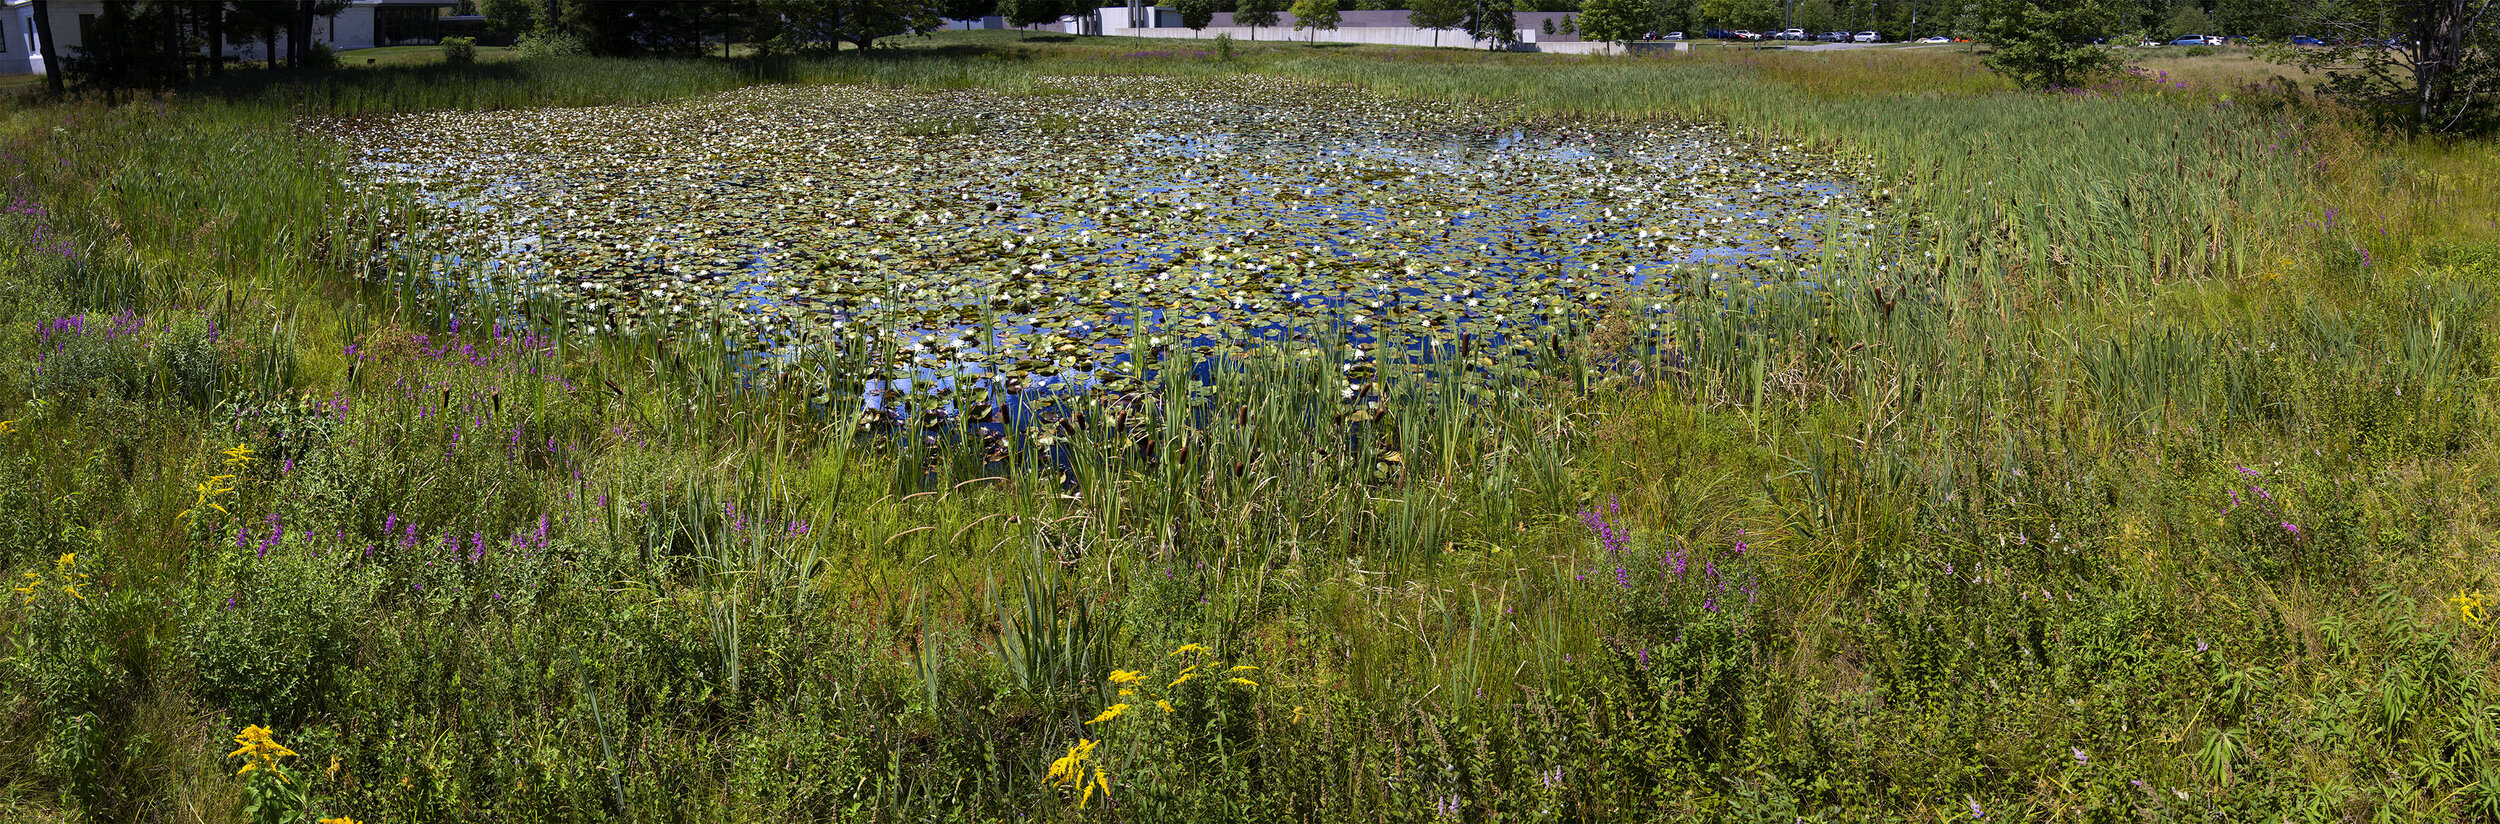 Stone Hill Lily Pond #11, August Noon